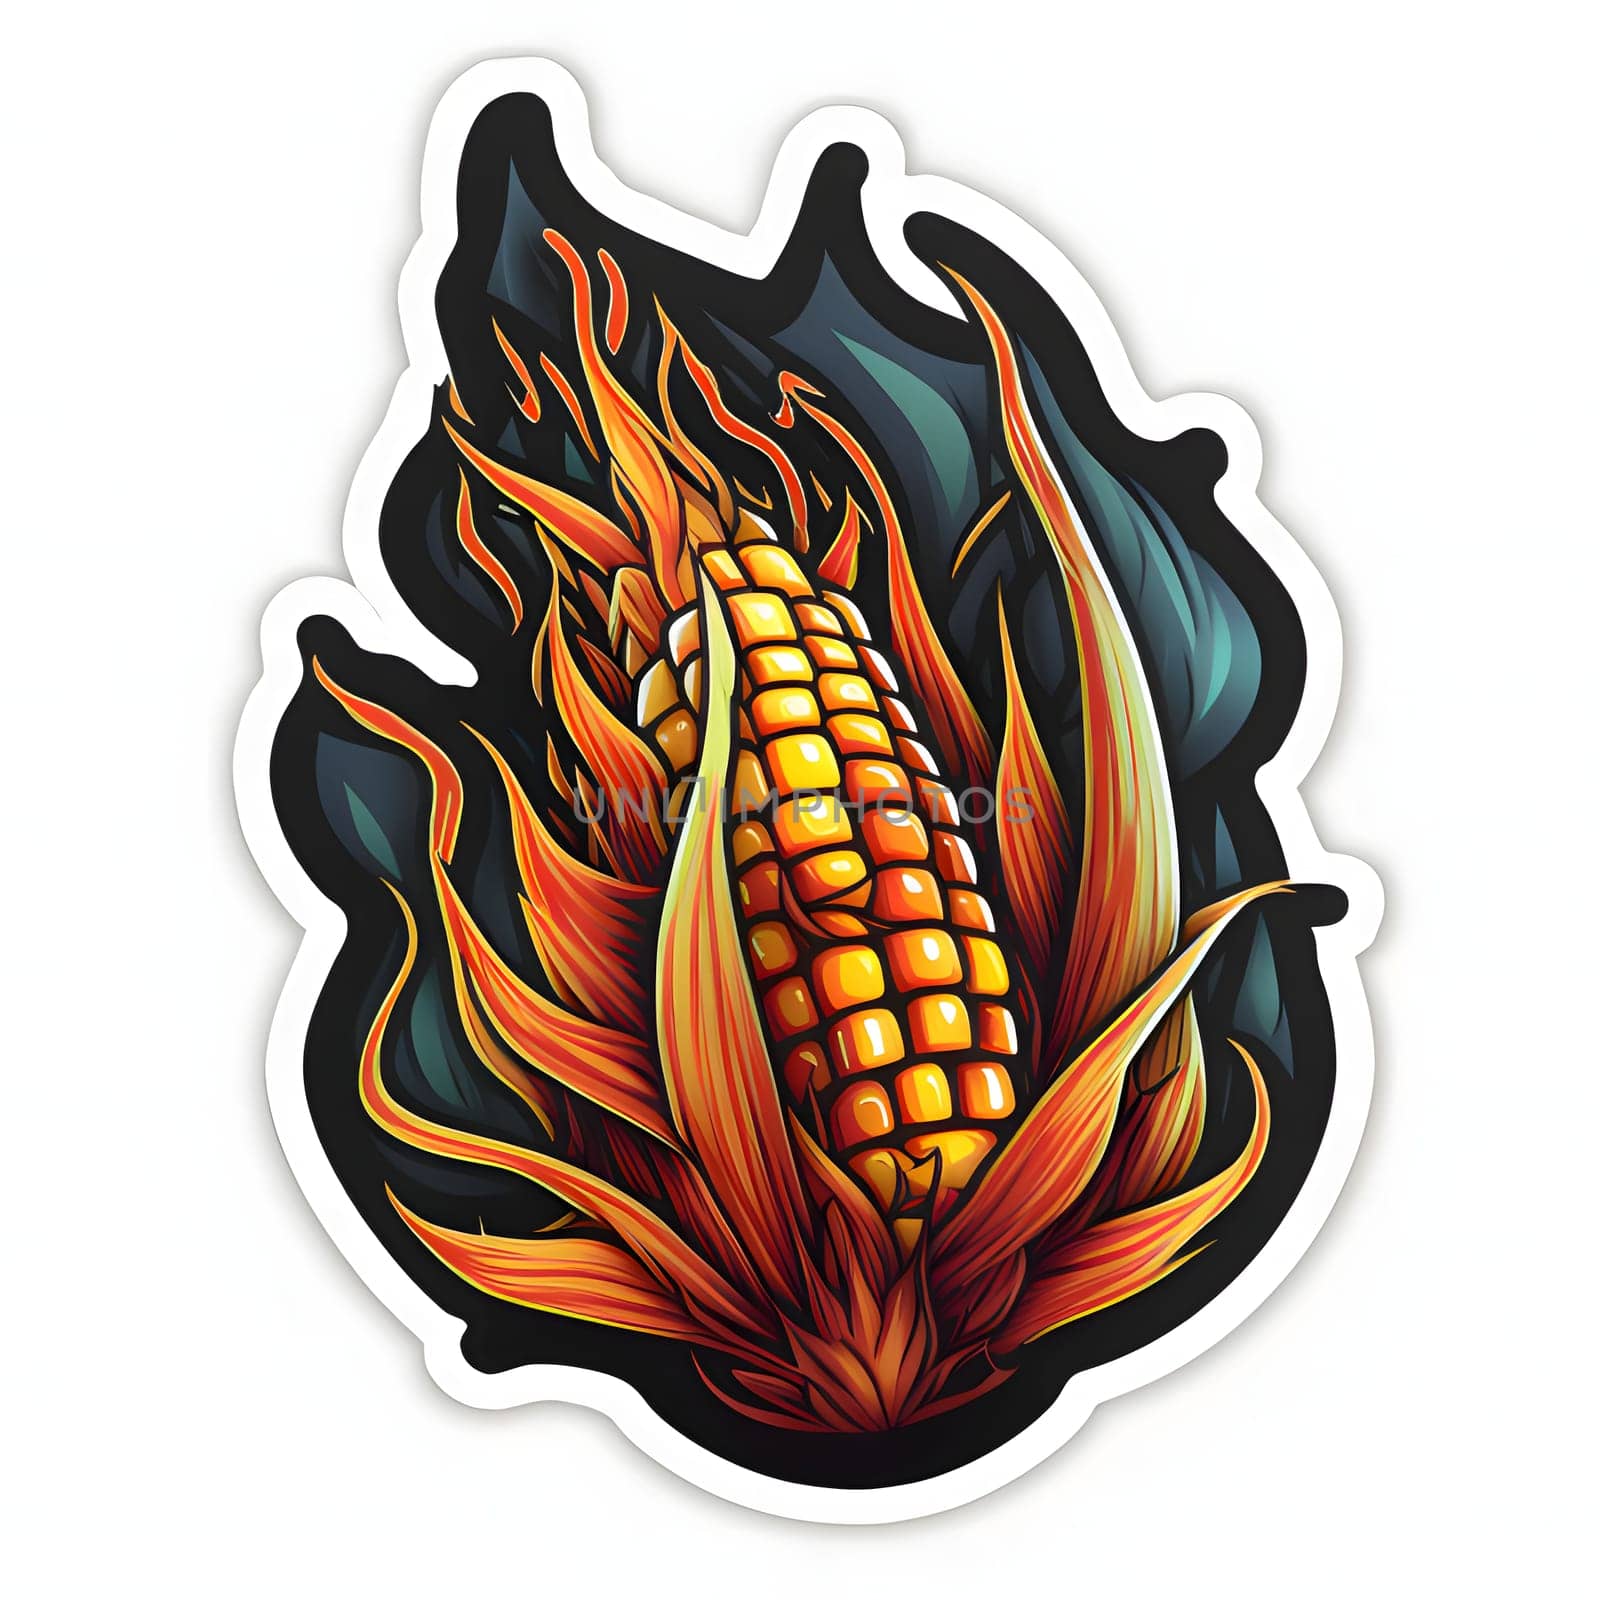 Sticker corn cob on a background of flames of fire. Corn as a dish of thanksgiving for the harvest, a picture on a white isolated background. by ThemesS